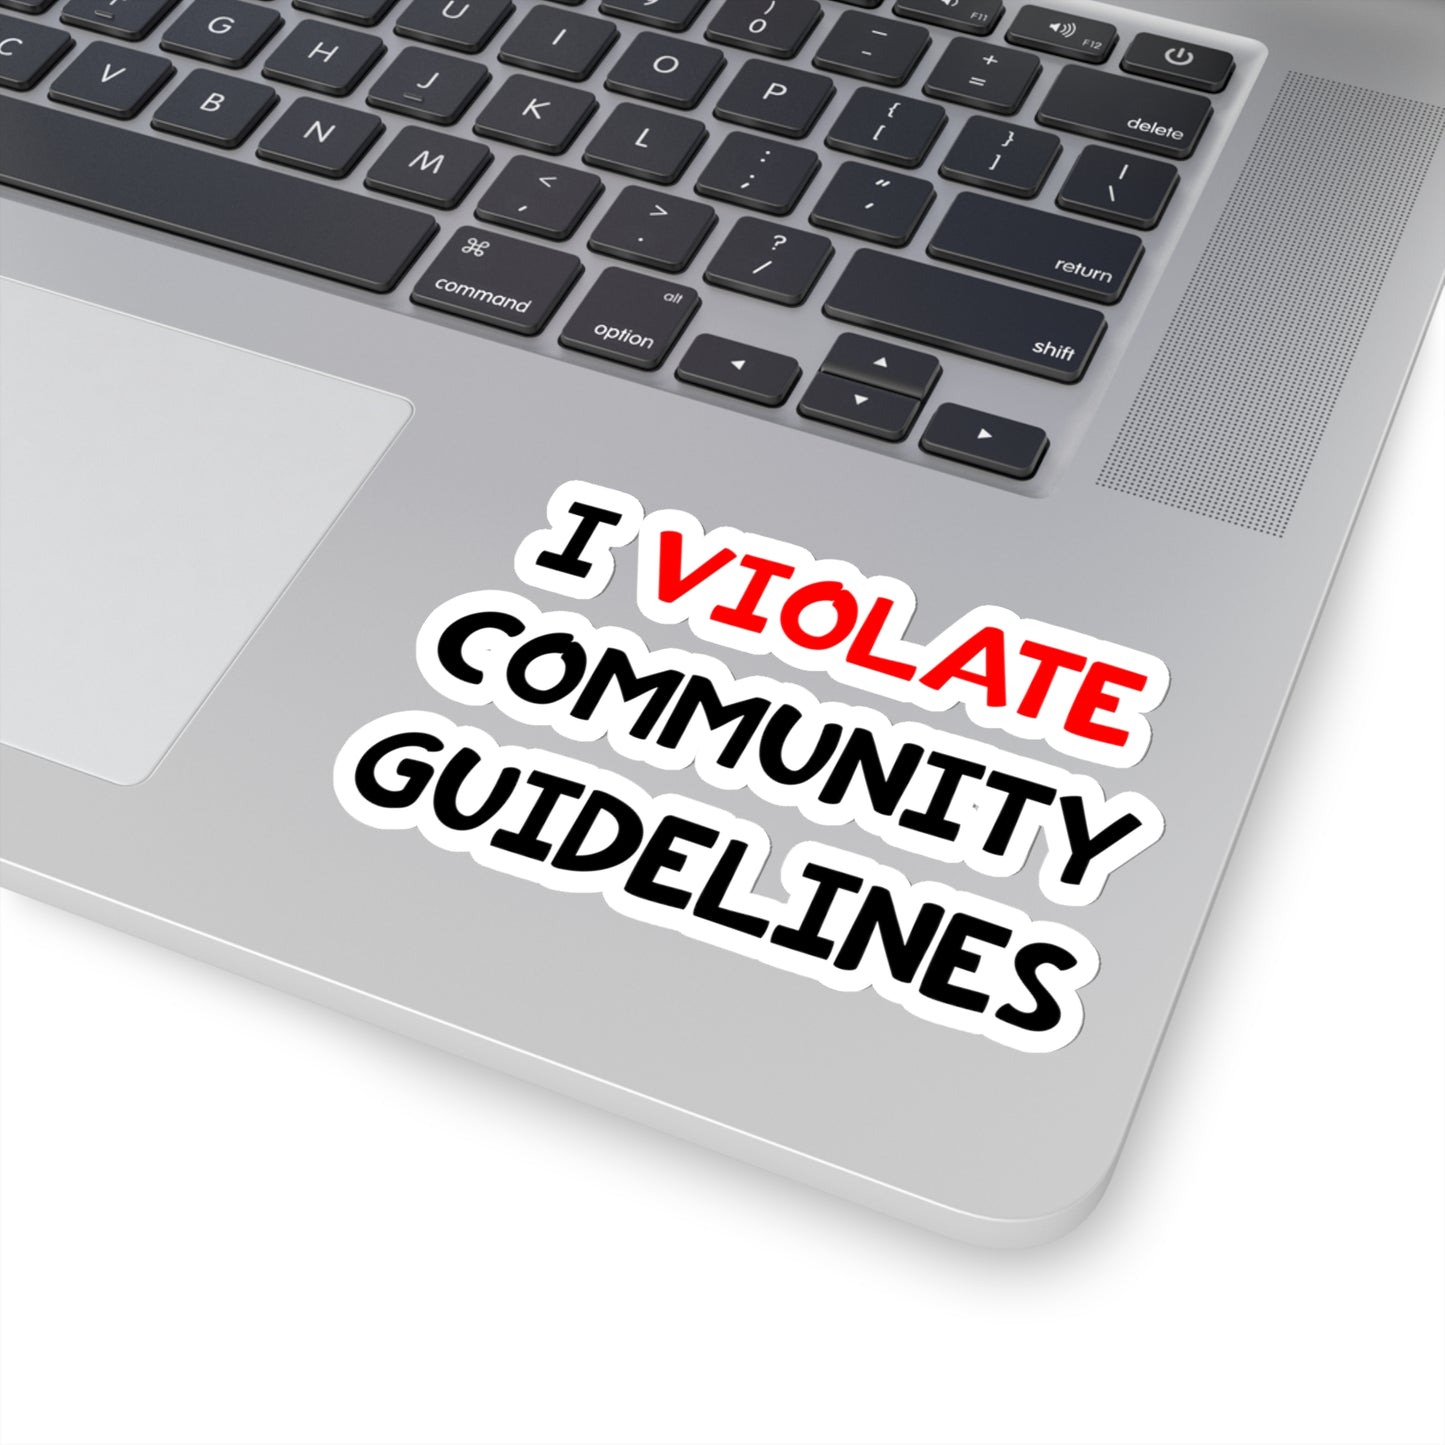 I Violate Community Guidelines - Kiss-Cut Stickers